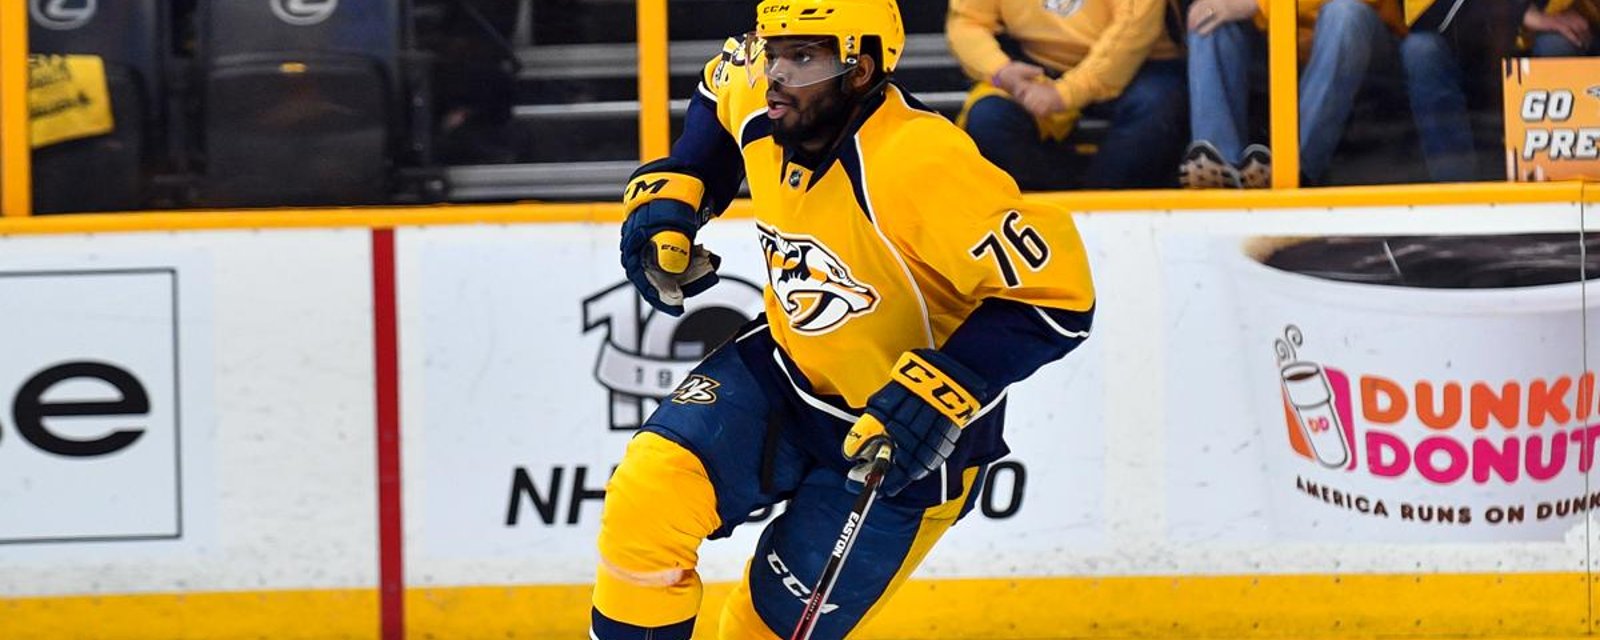 Subban stole the show again today! 